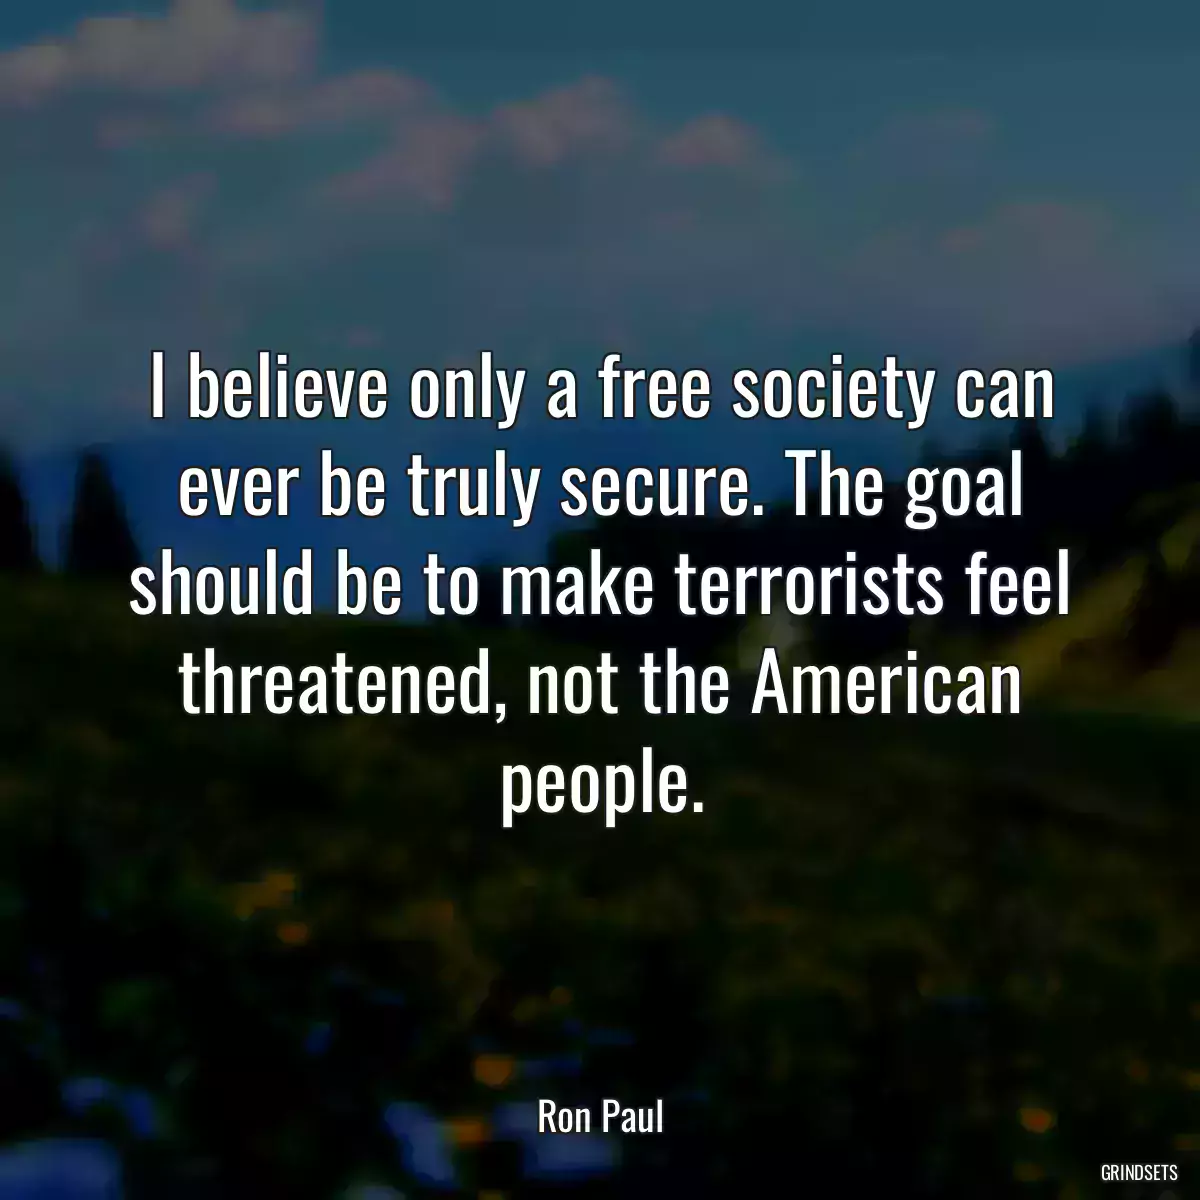 I believe only a free society can ever be truly secure. The goal should be to make terrorists feel threatened, not the American people.